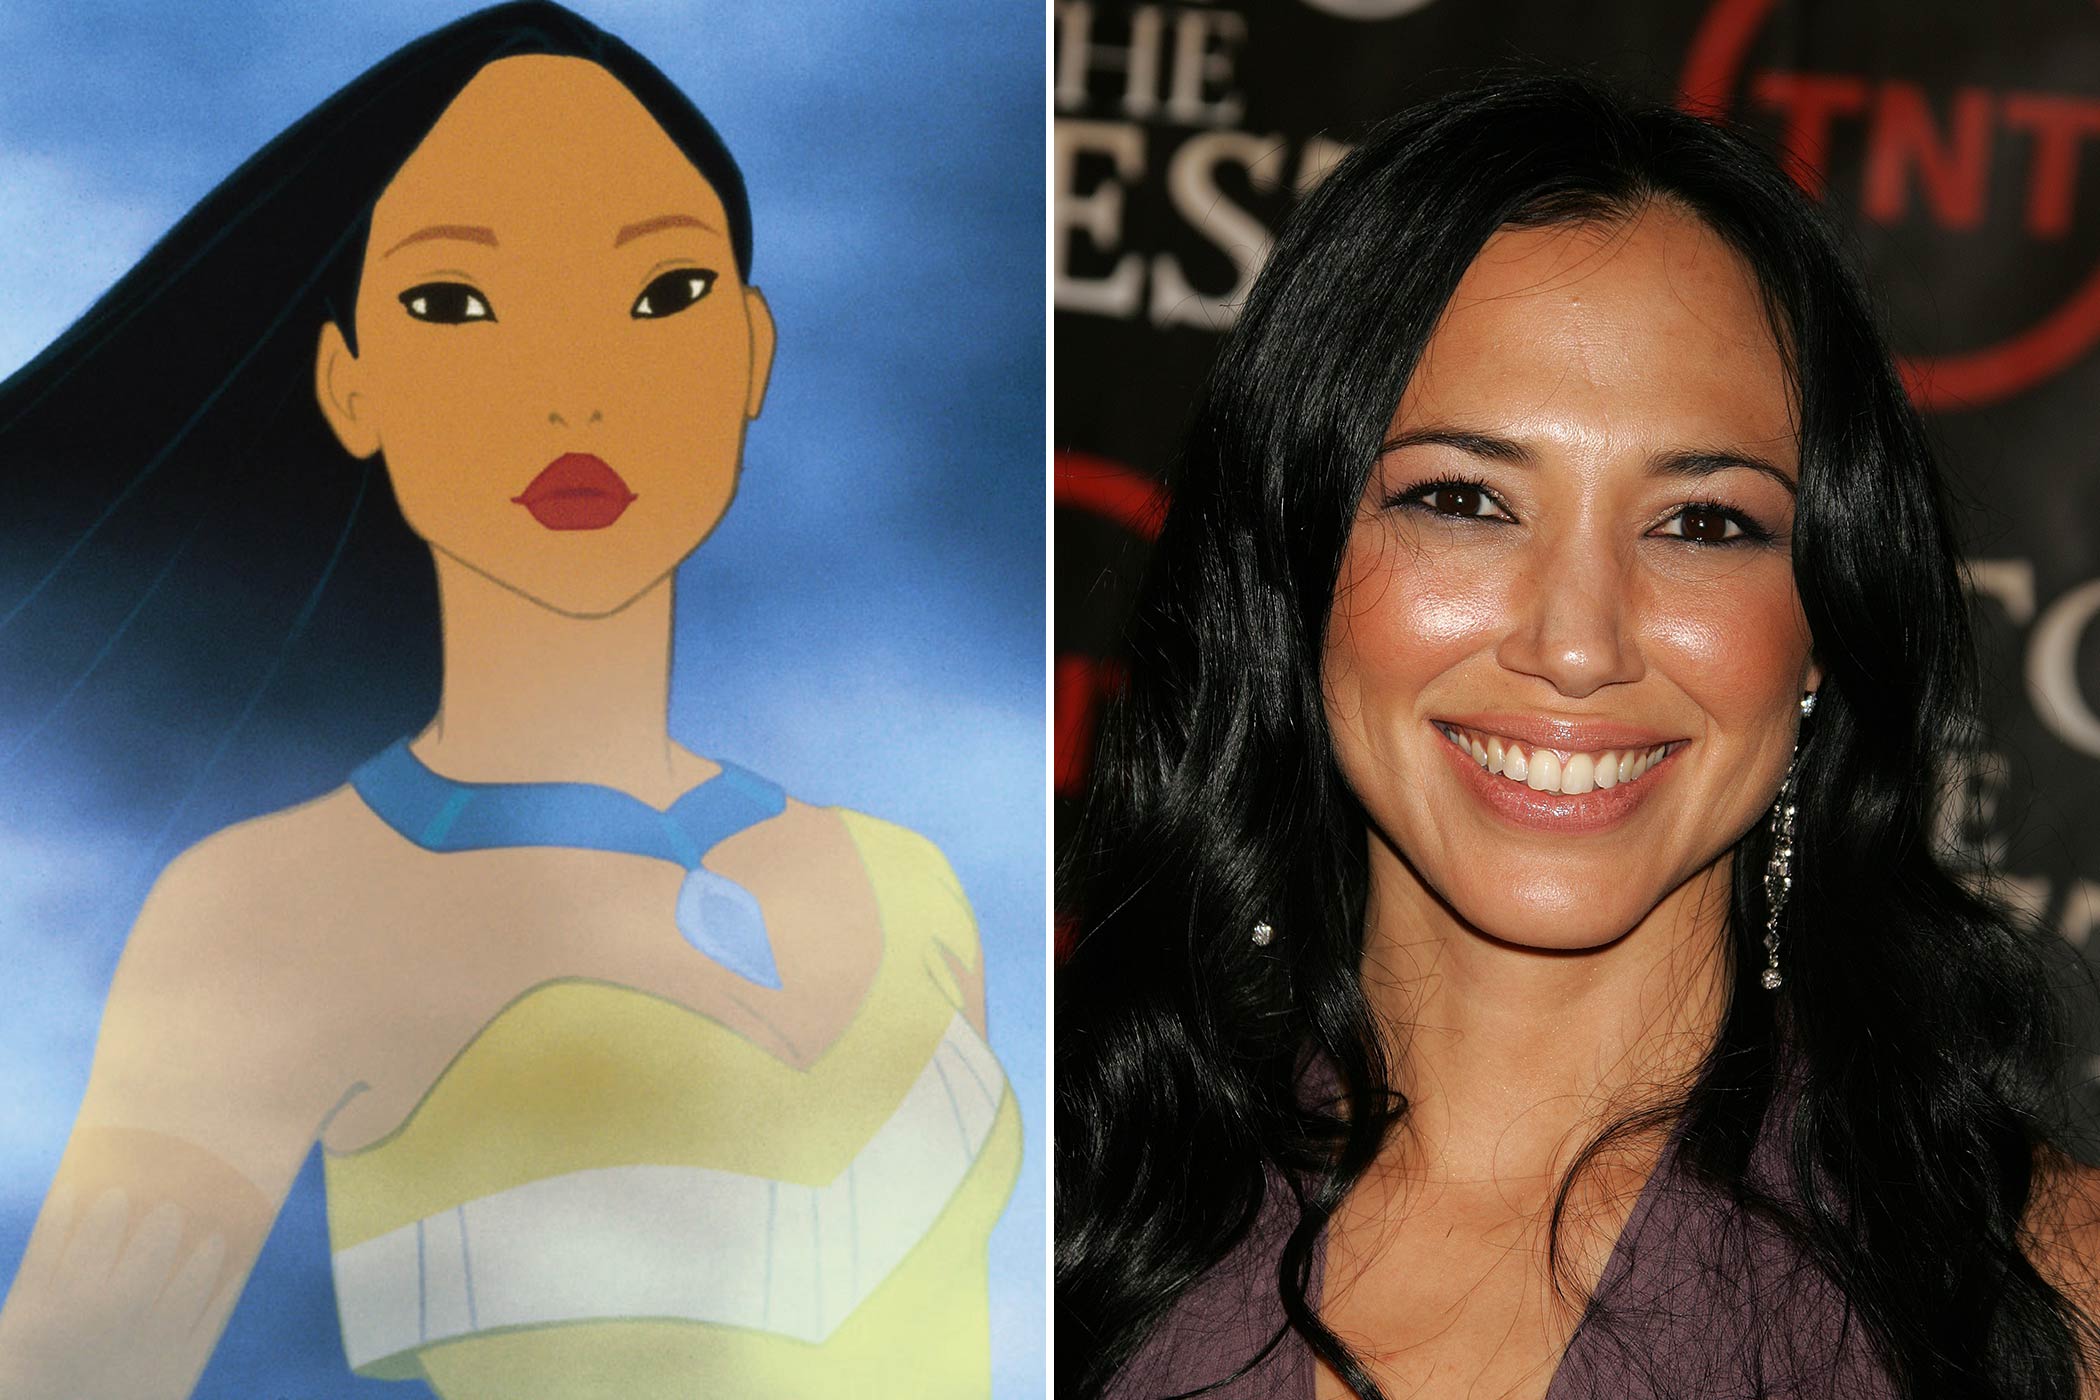 Pocahontas: Irene Bedard
                              Born in Alaska, Irene Bedard is of Inupiat, Inuit and Métis descent. Bedard was not only the voice of Pocahontas, animators also incorporated some of her facial expressions into the character.